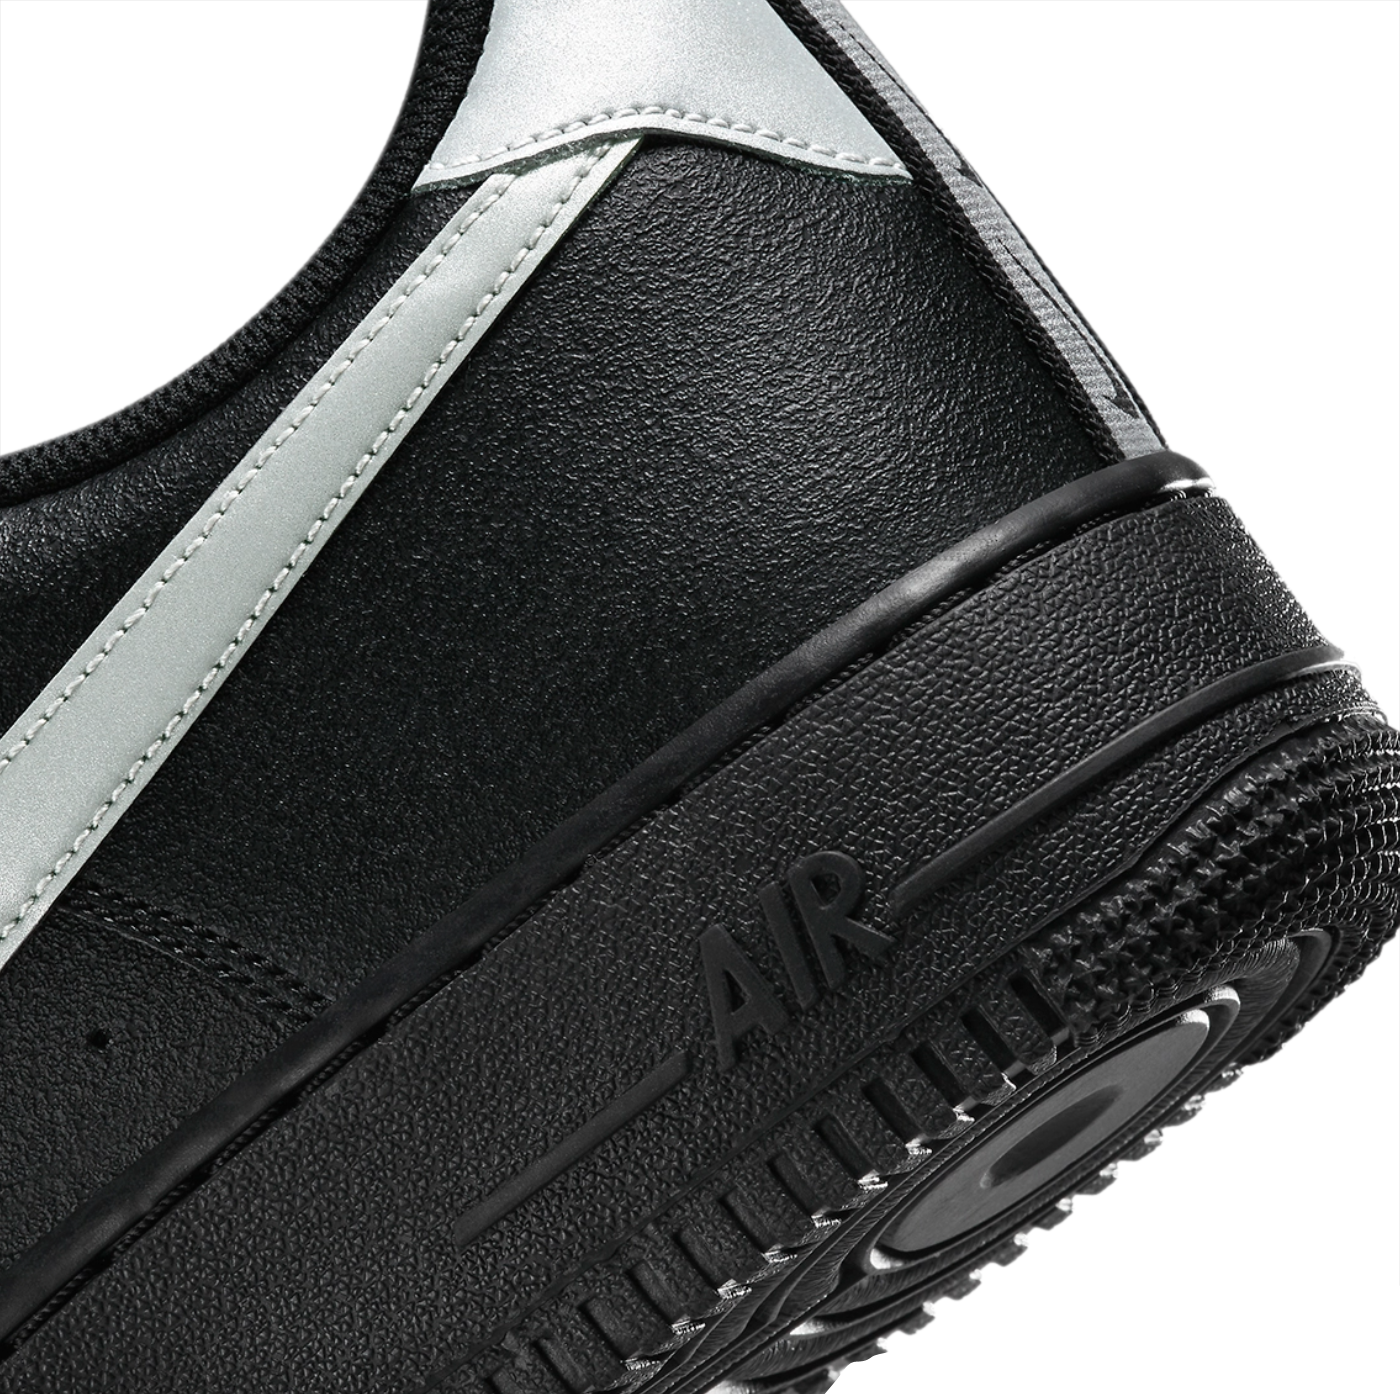 Nike Air Force 1 Low Black Silver DX8967-001